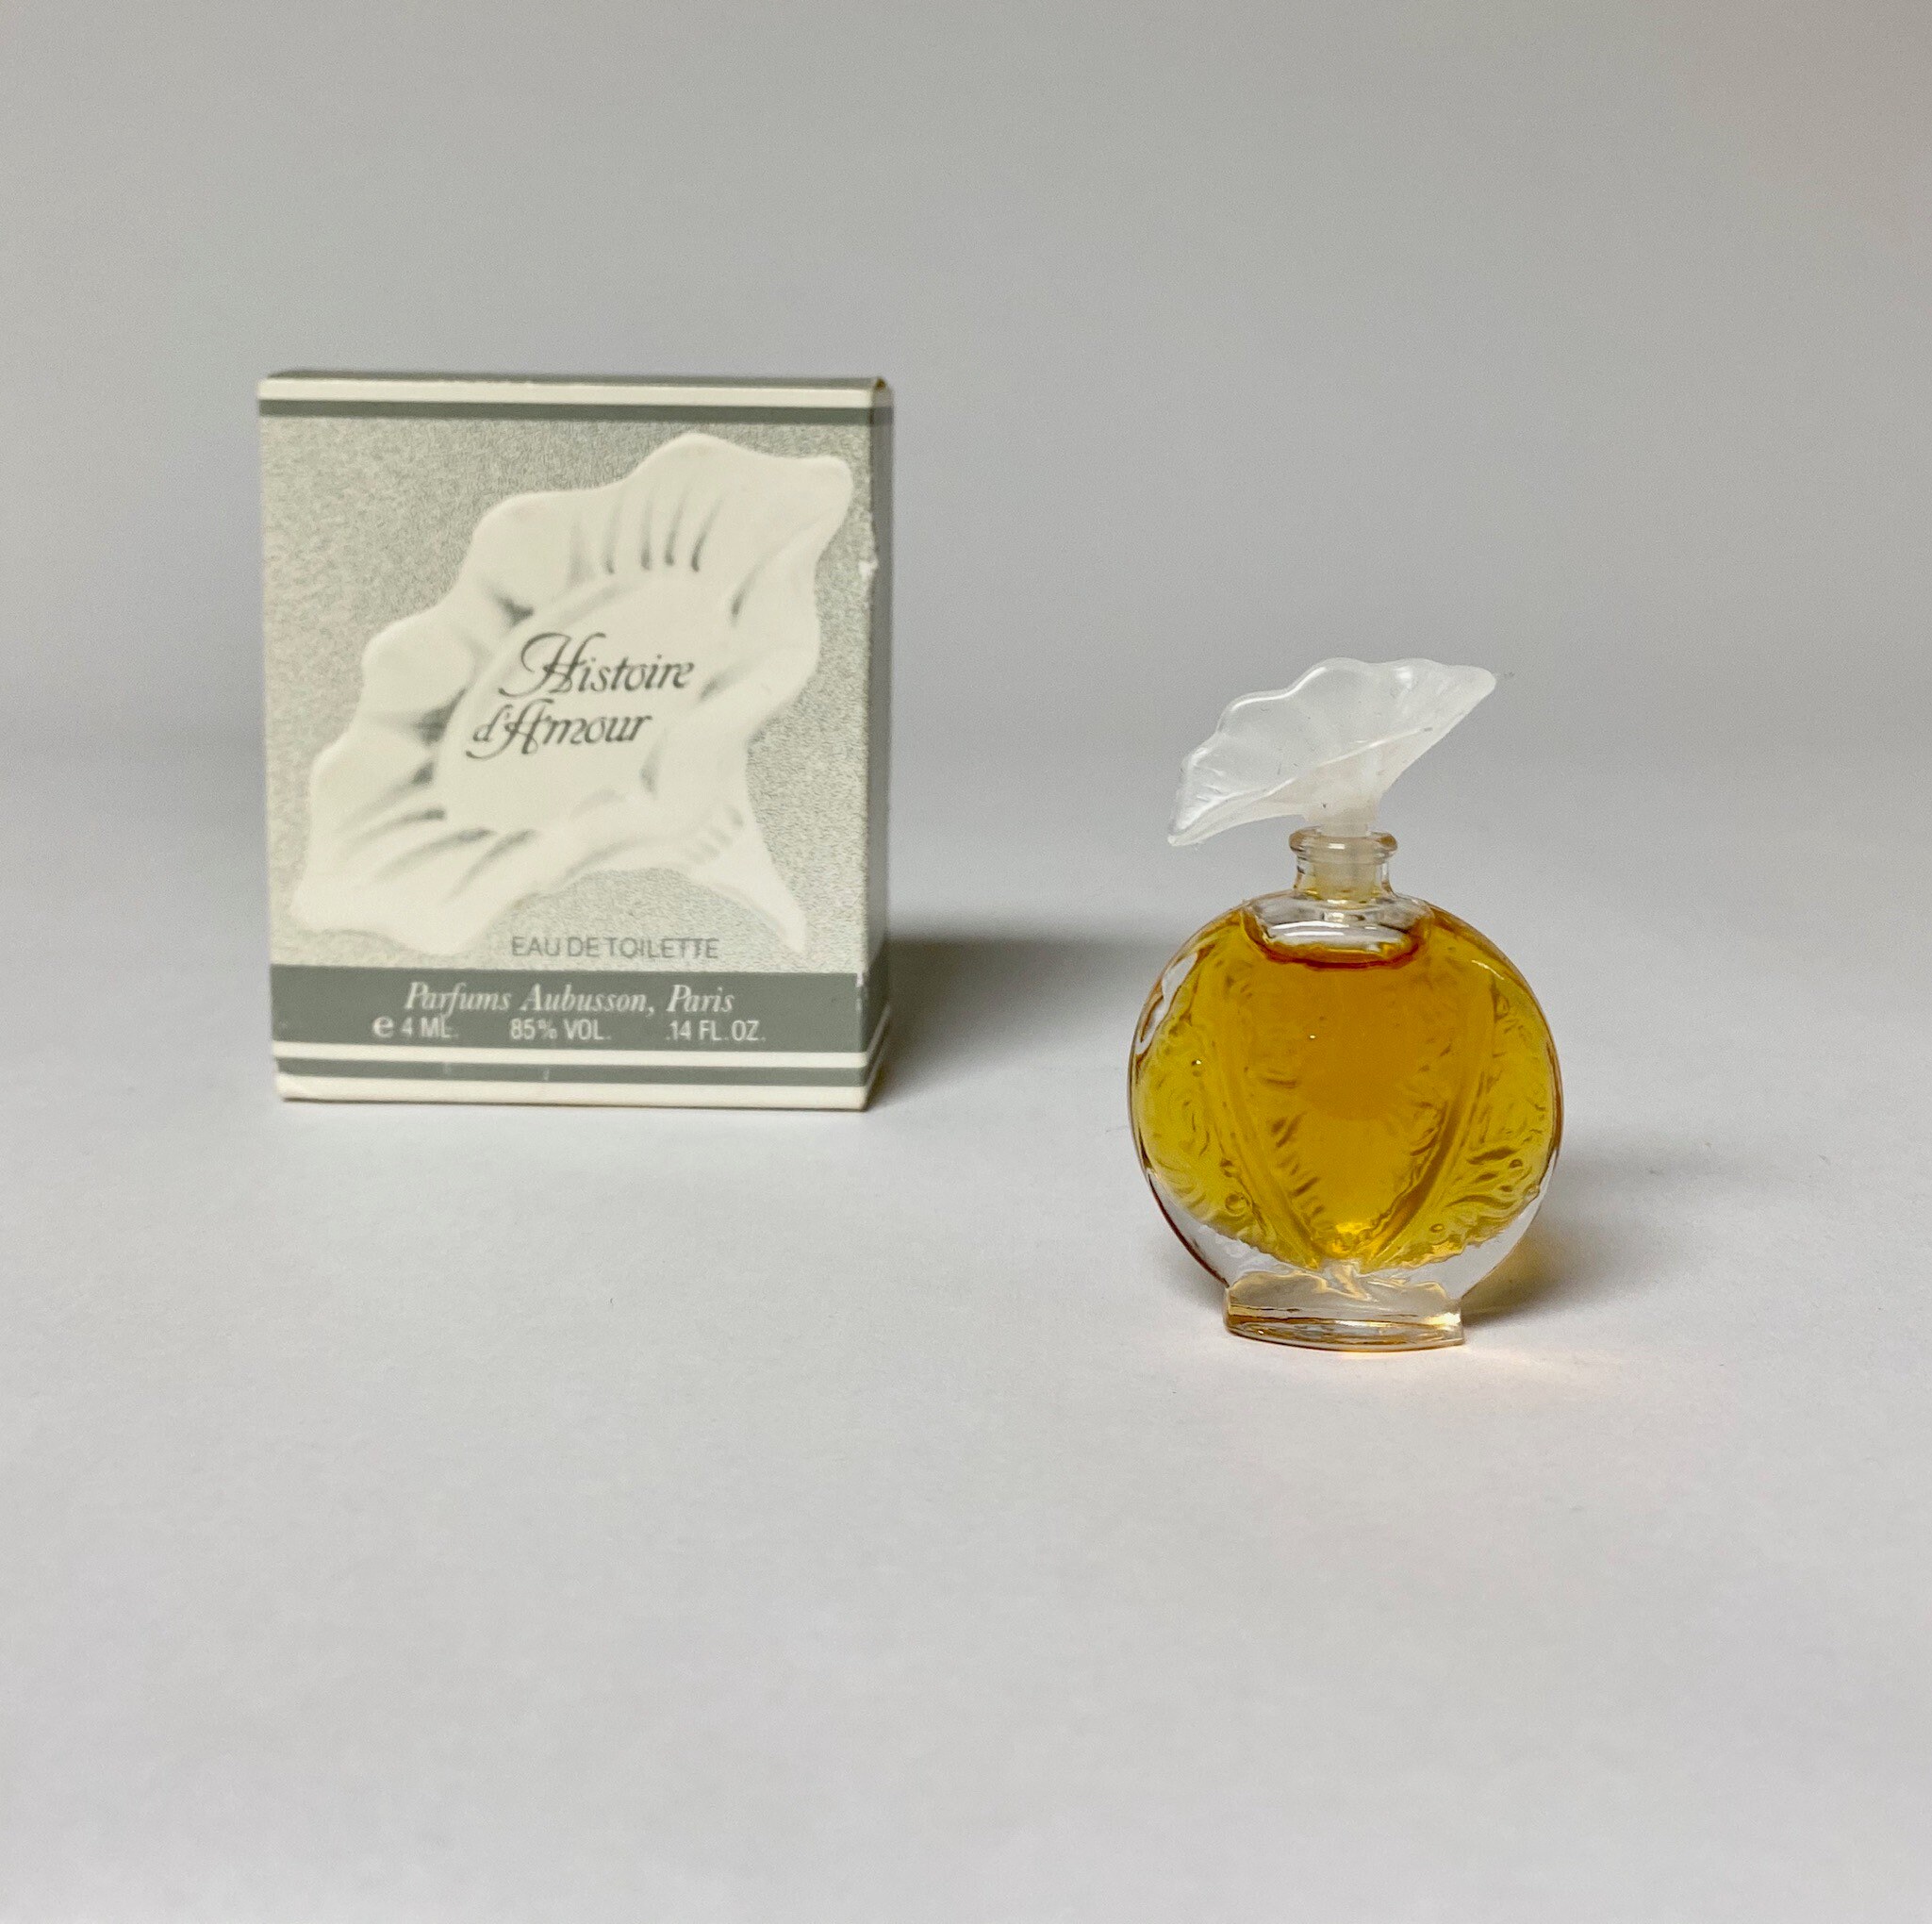 Histoire Damour by Abusson Vintage Women Fragrance -  UK